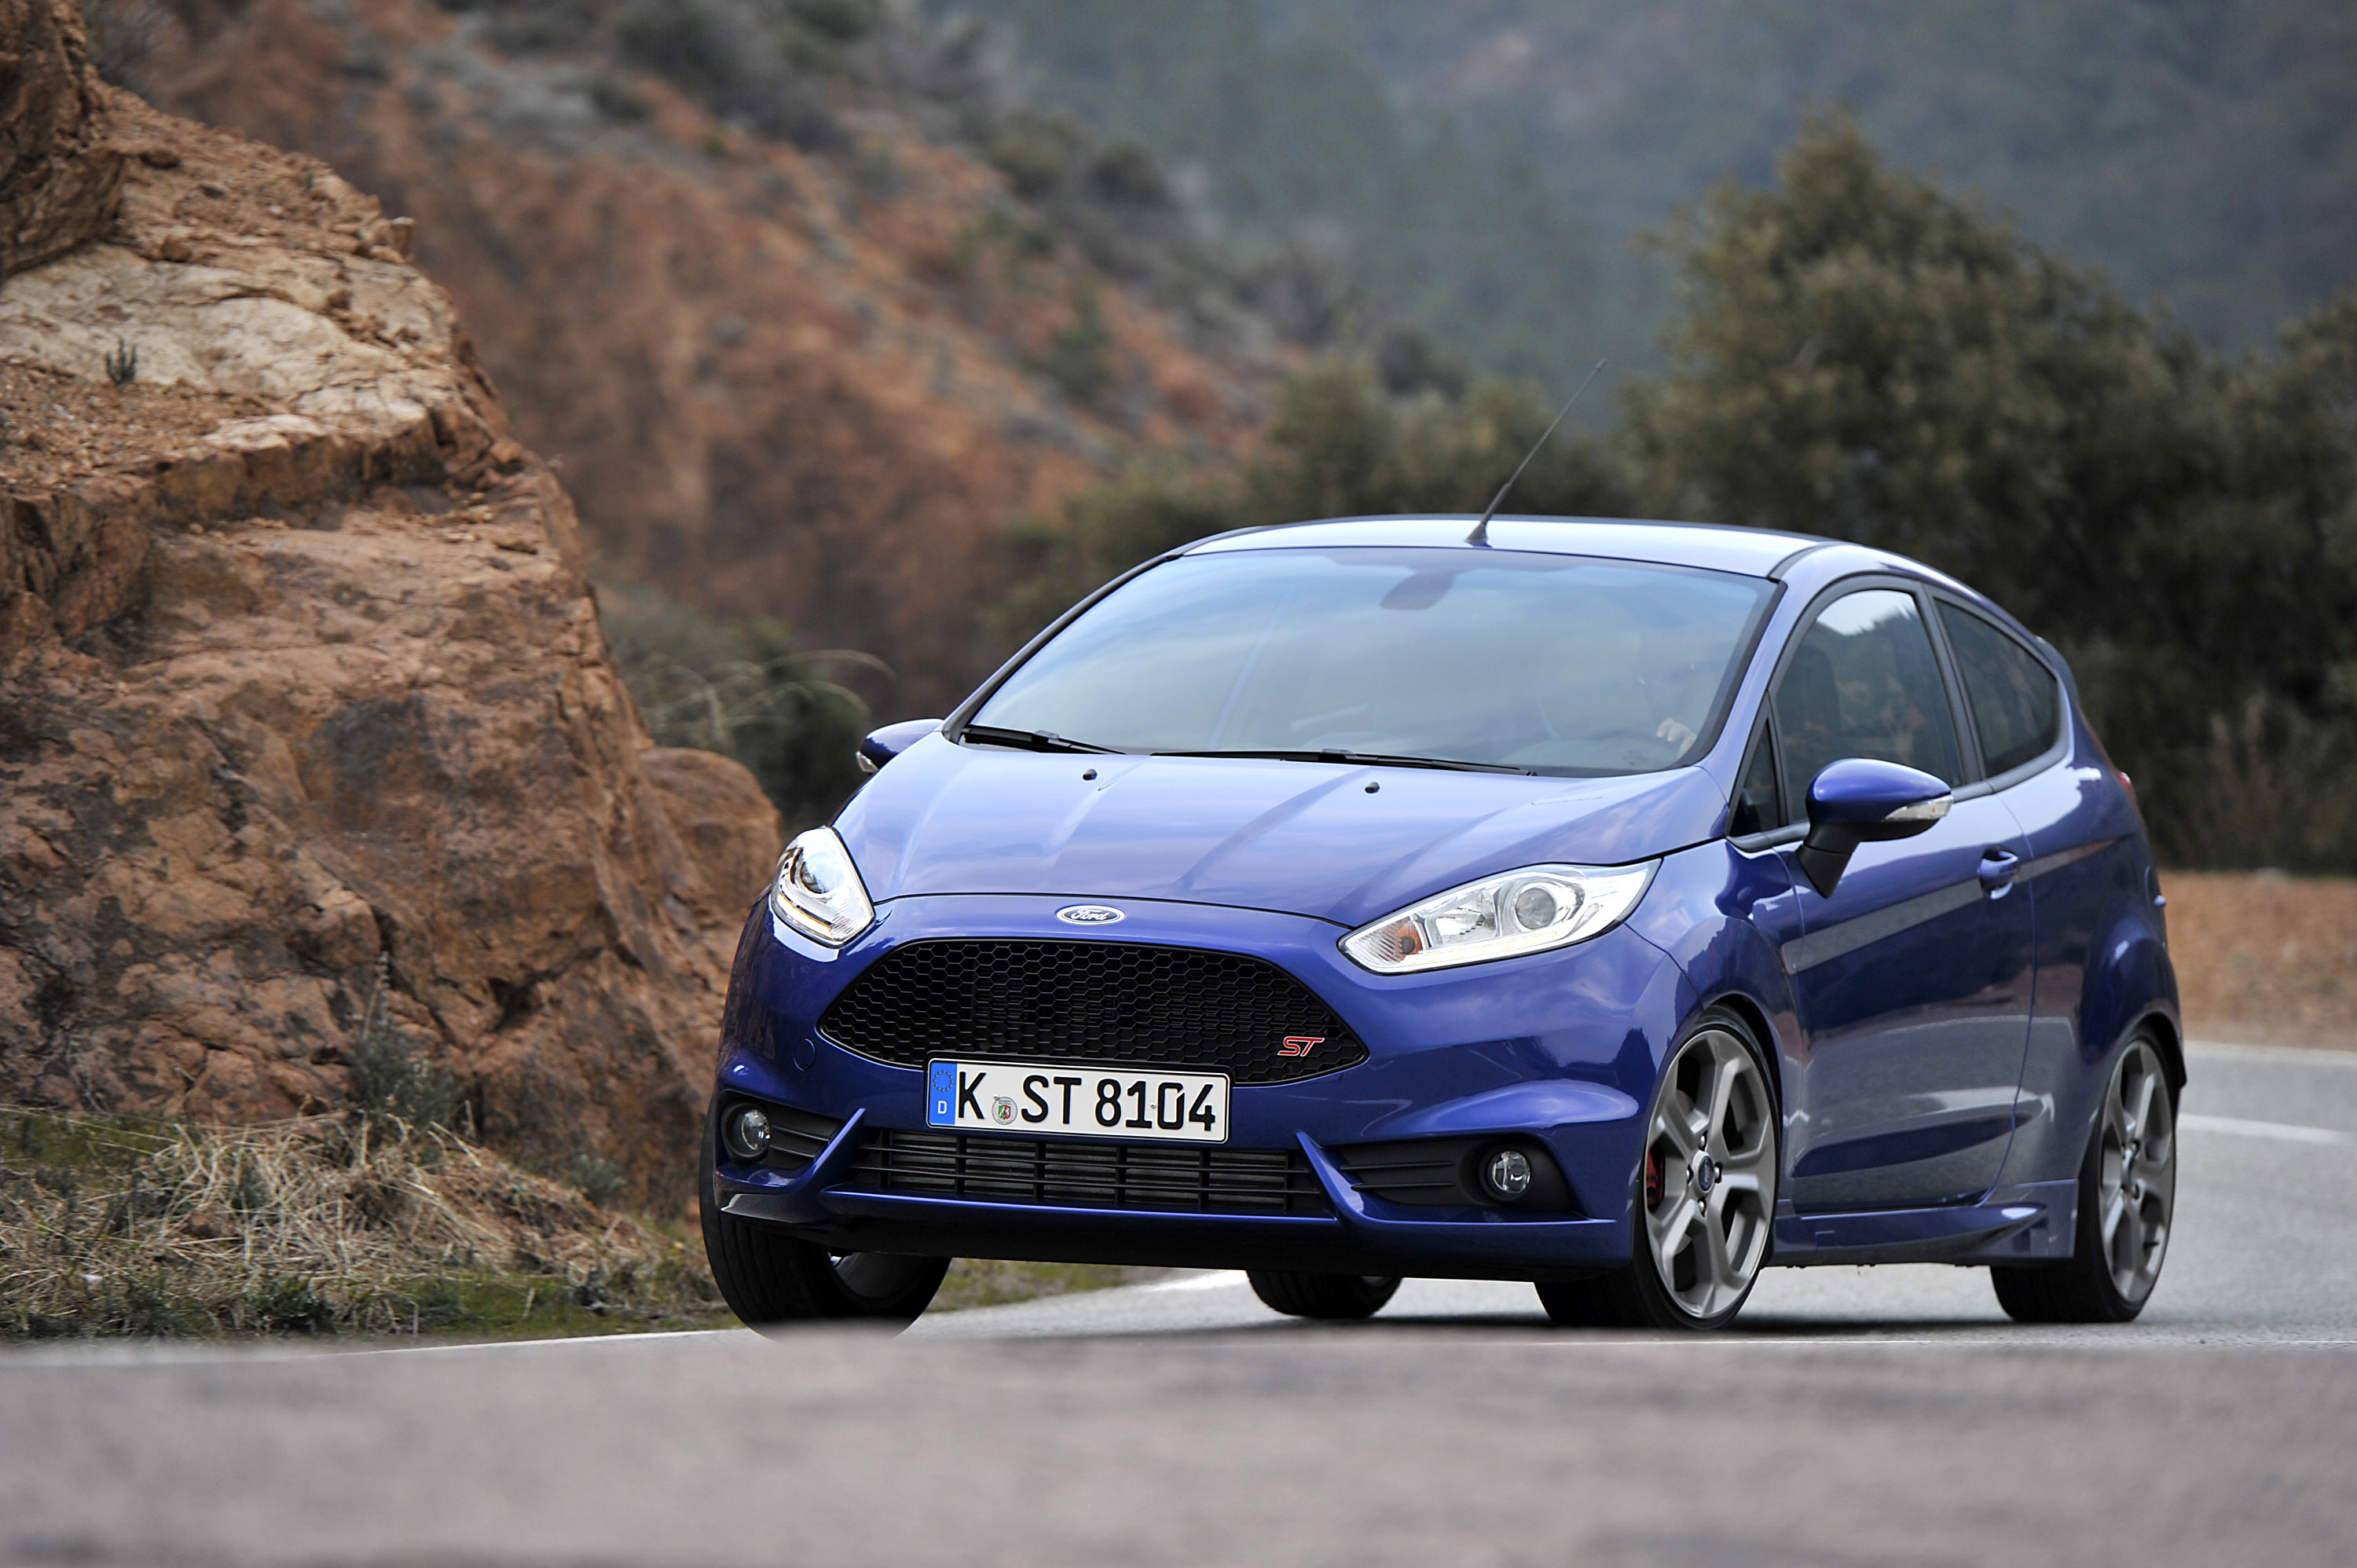 2013 Ford Fiesta ST - HD Pictures @ carsinvasion.com